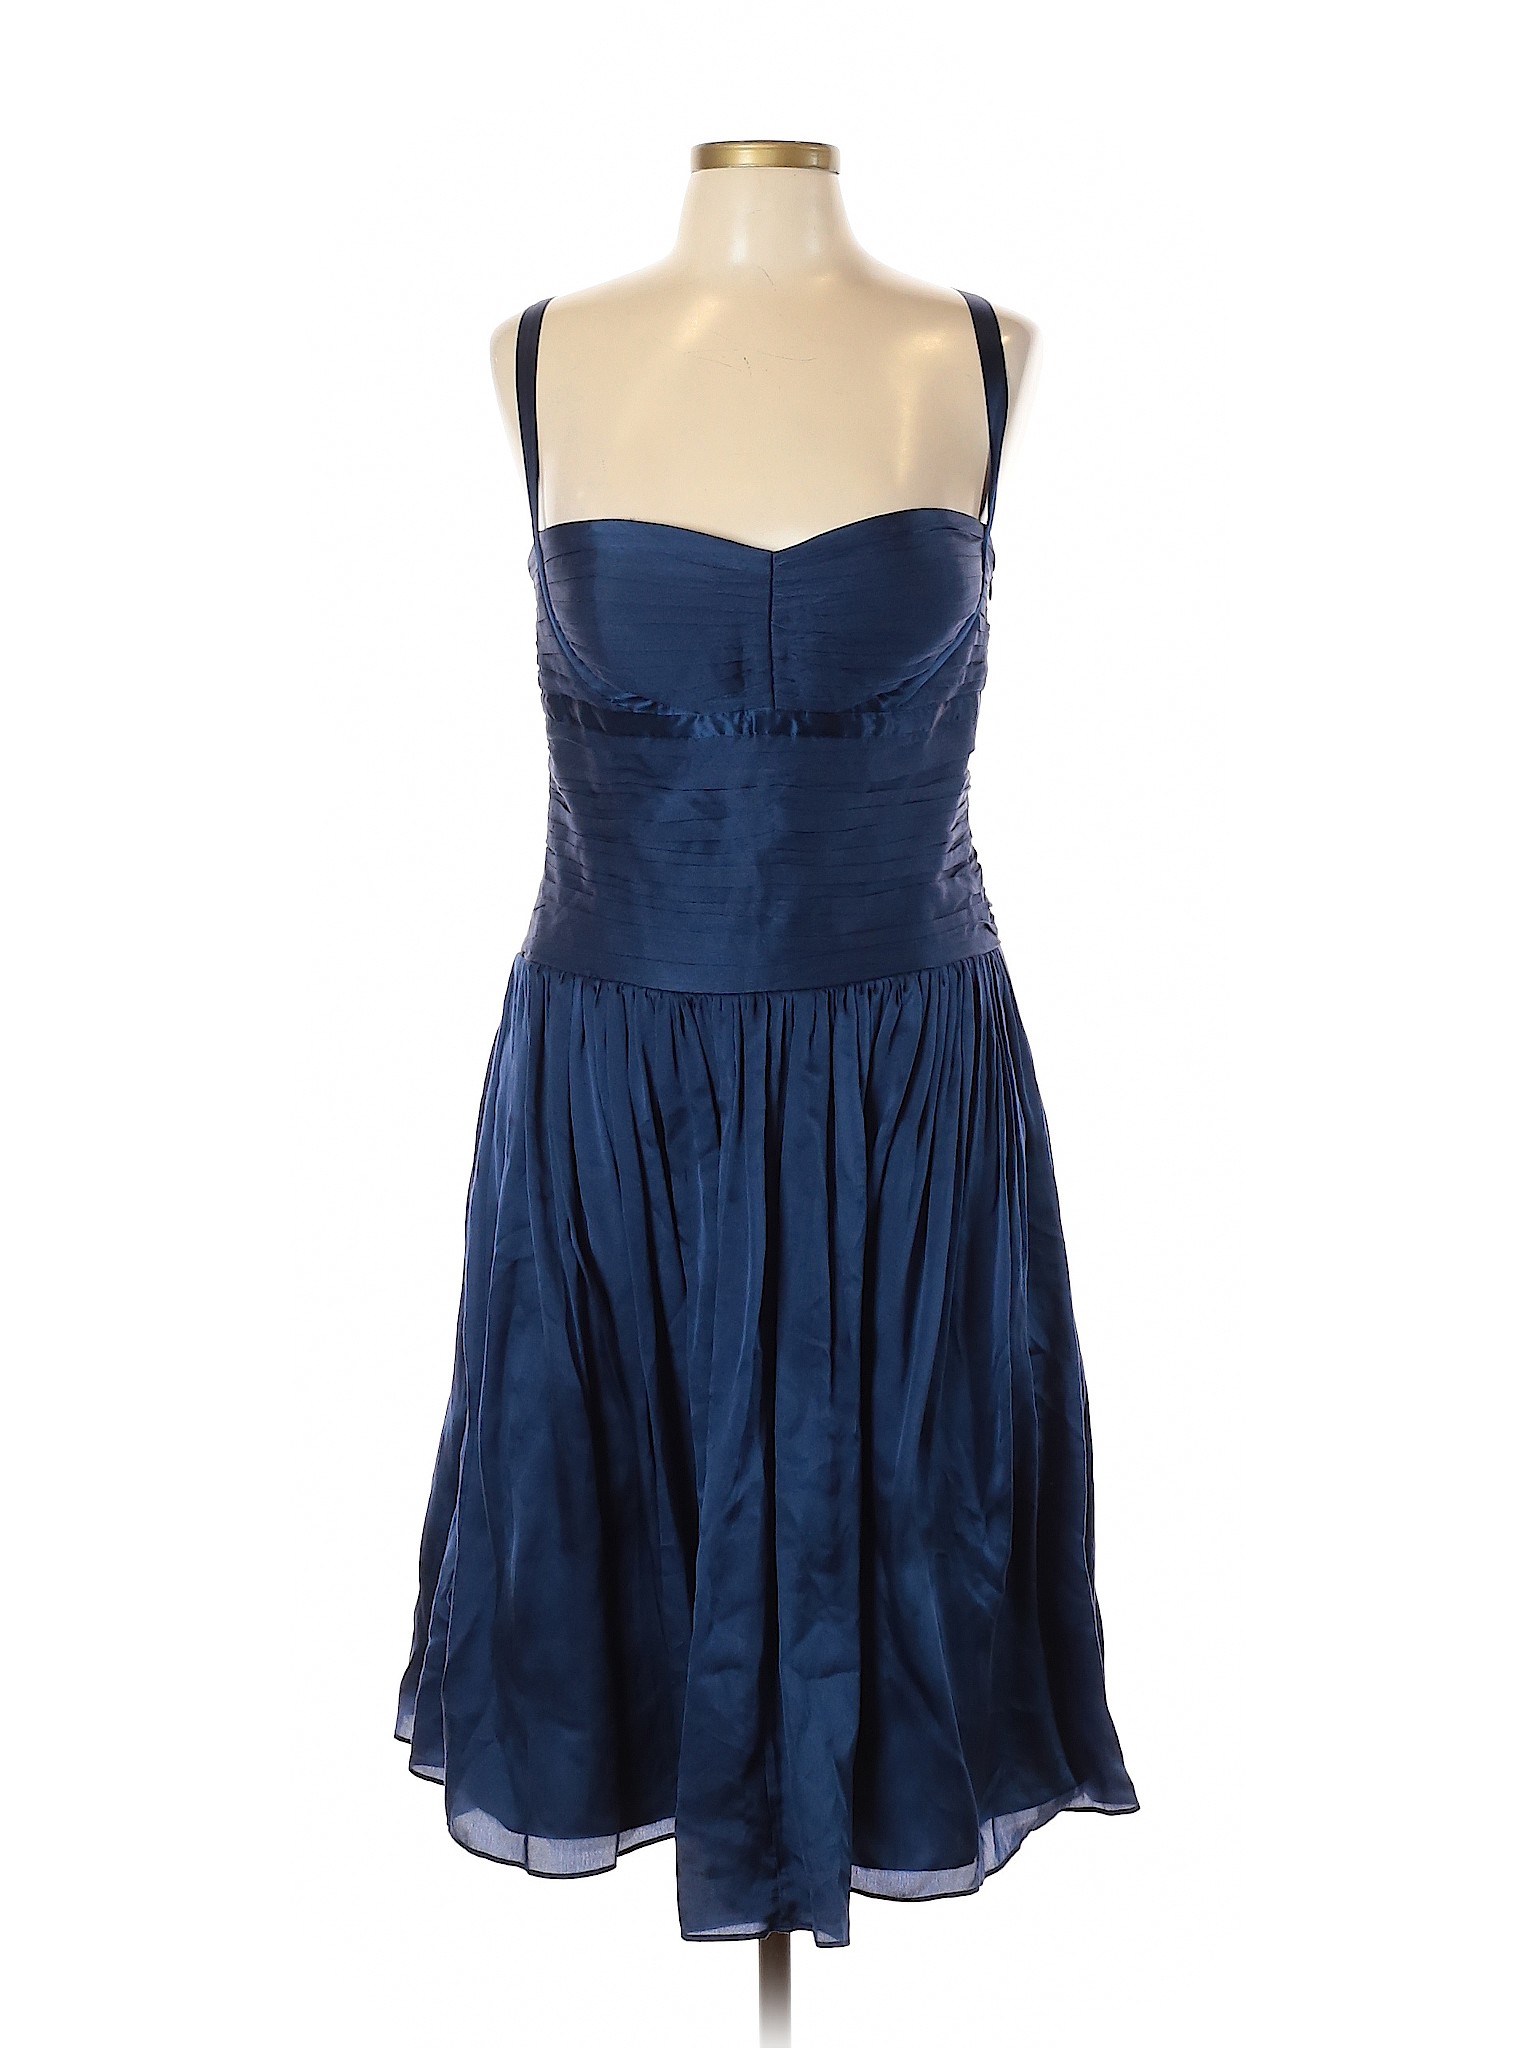 Laundry 100% Silk Solid Blue Cocktail Dress Size 12 - 81% off | thredUP